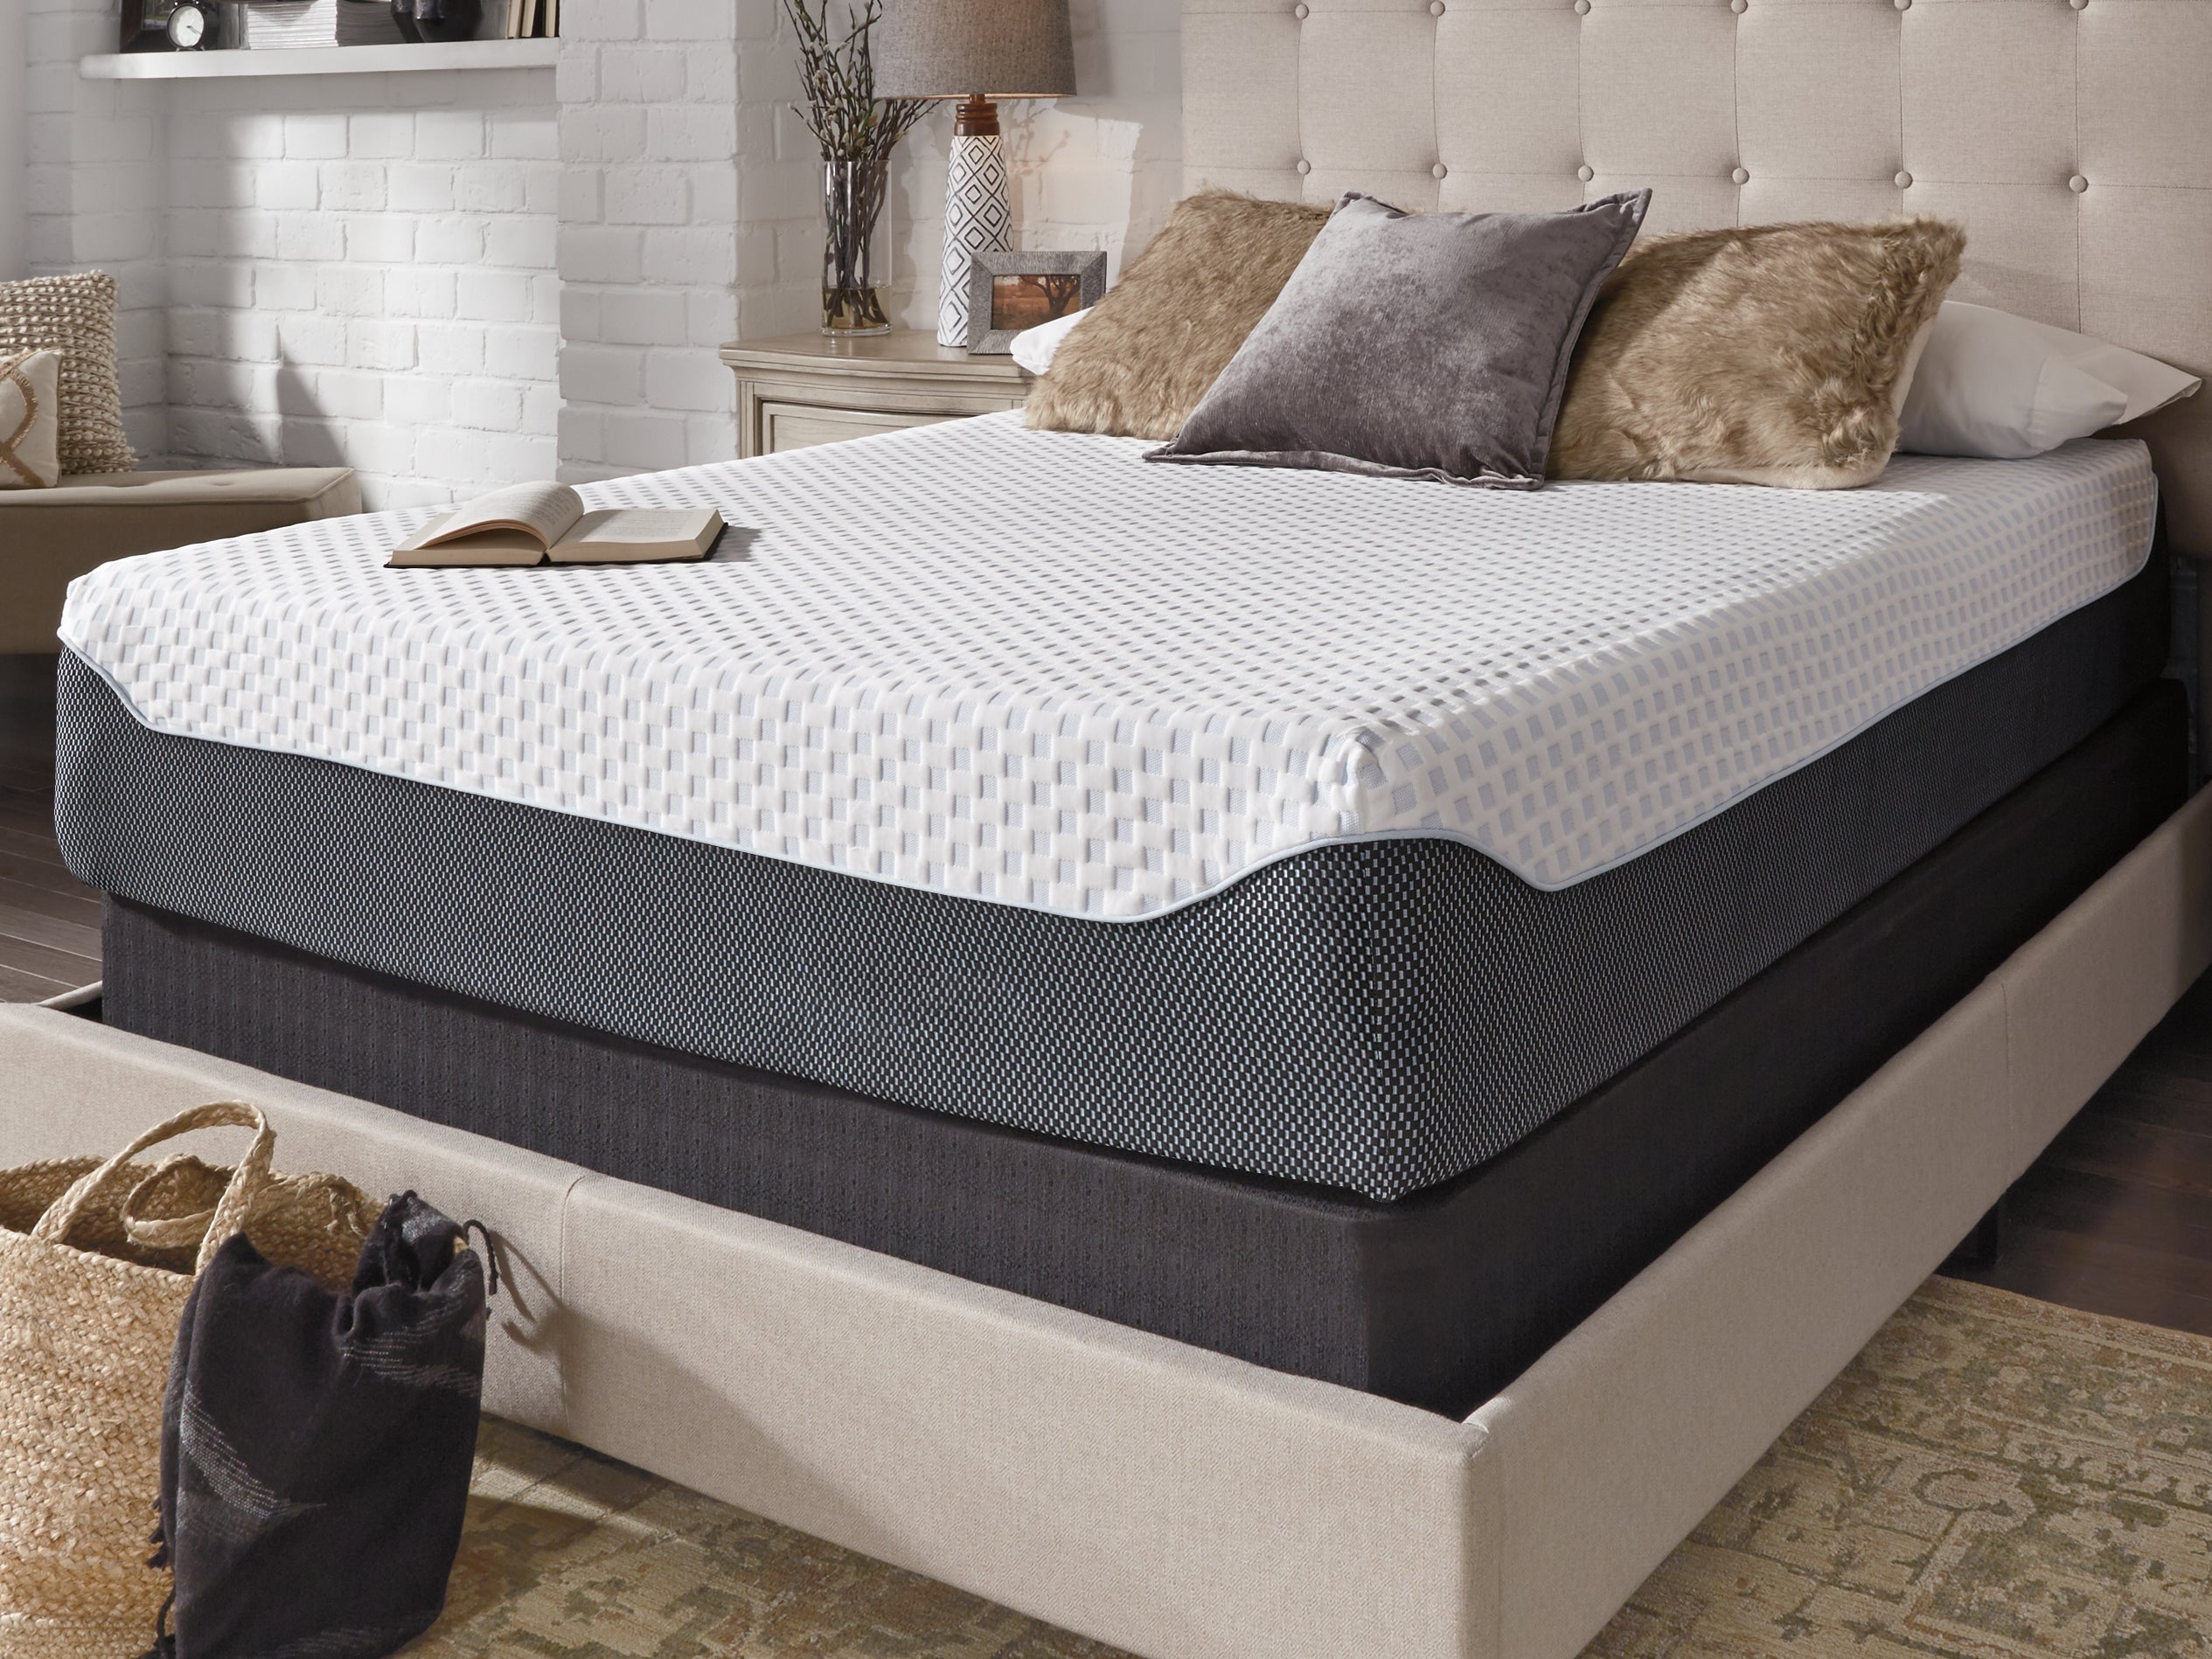 12 Inch Chime Elite King Memory Foam Mattress in a box with Better than a Boxspring 2-Piece King Foundation - furniture place usa